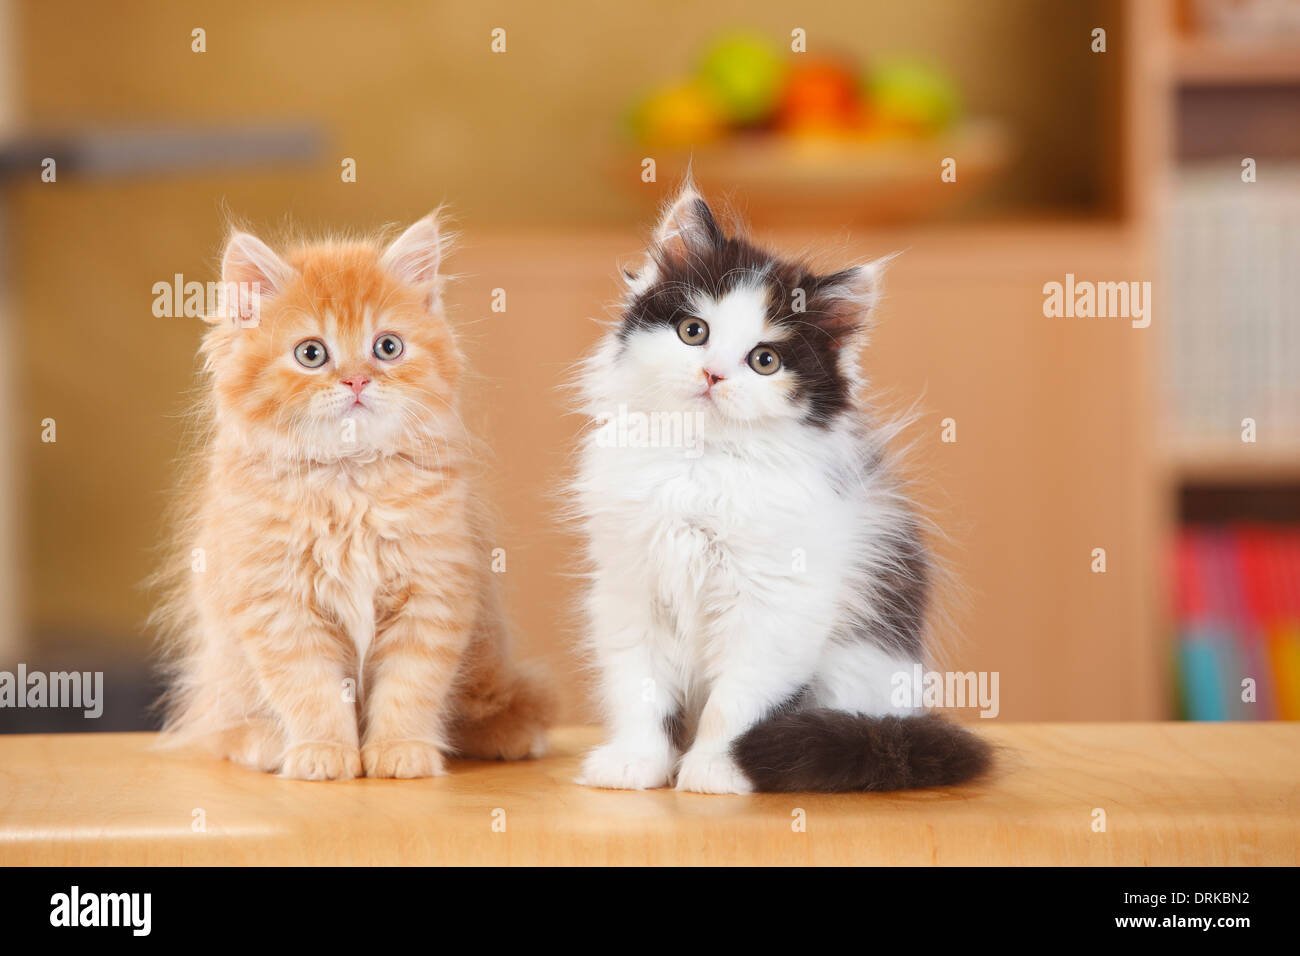 British Longhair, two kittens sitting side by side Stock Photo